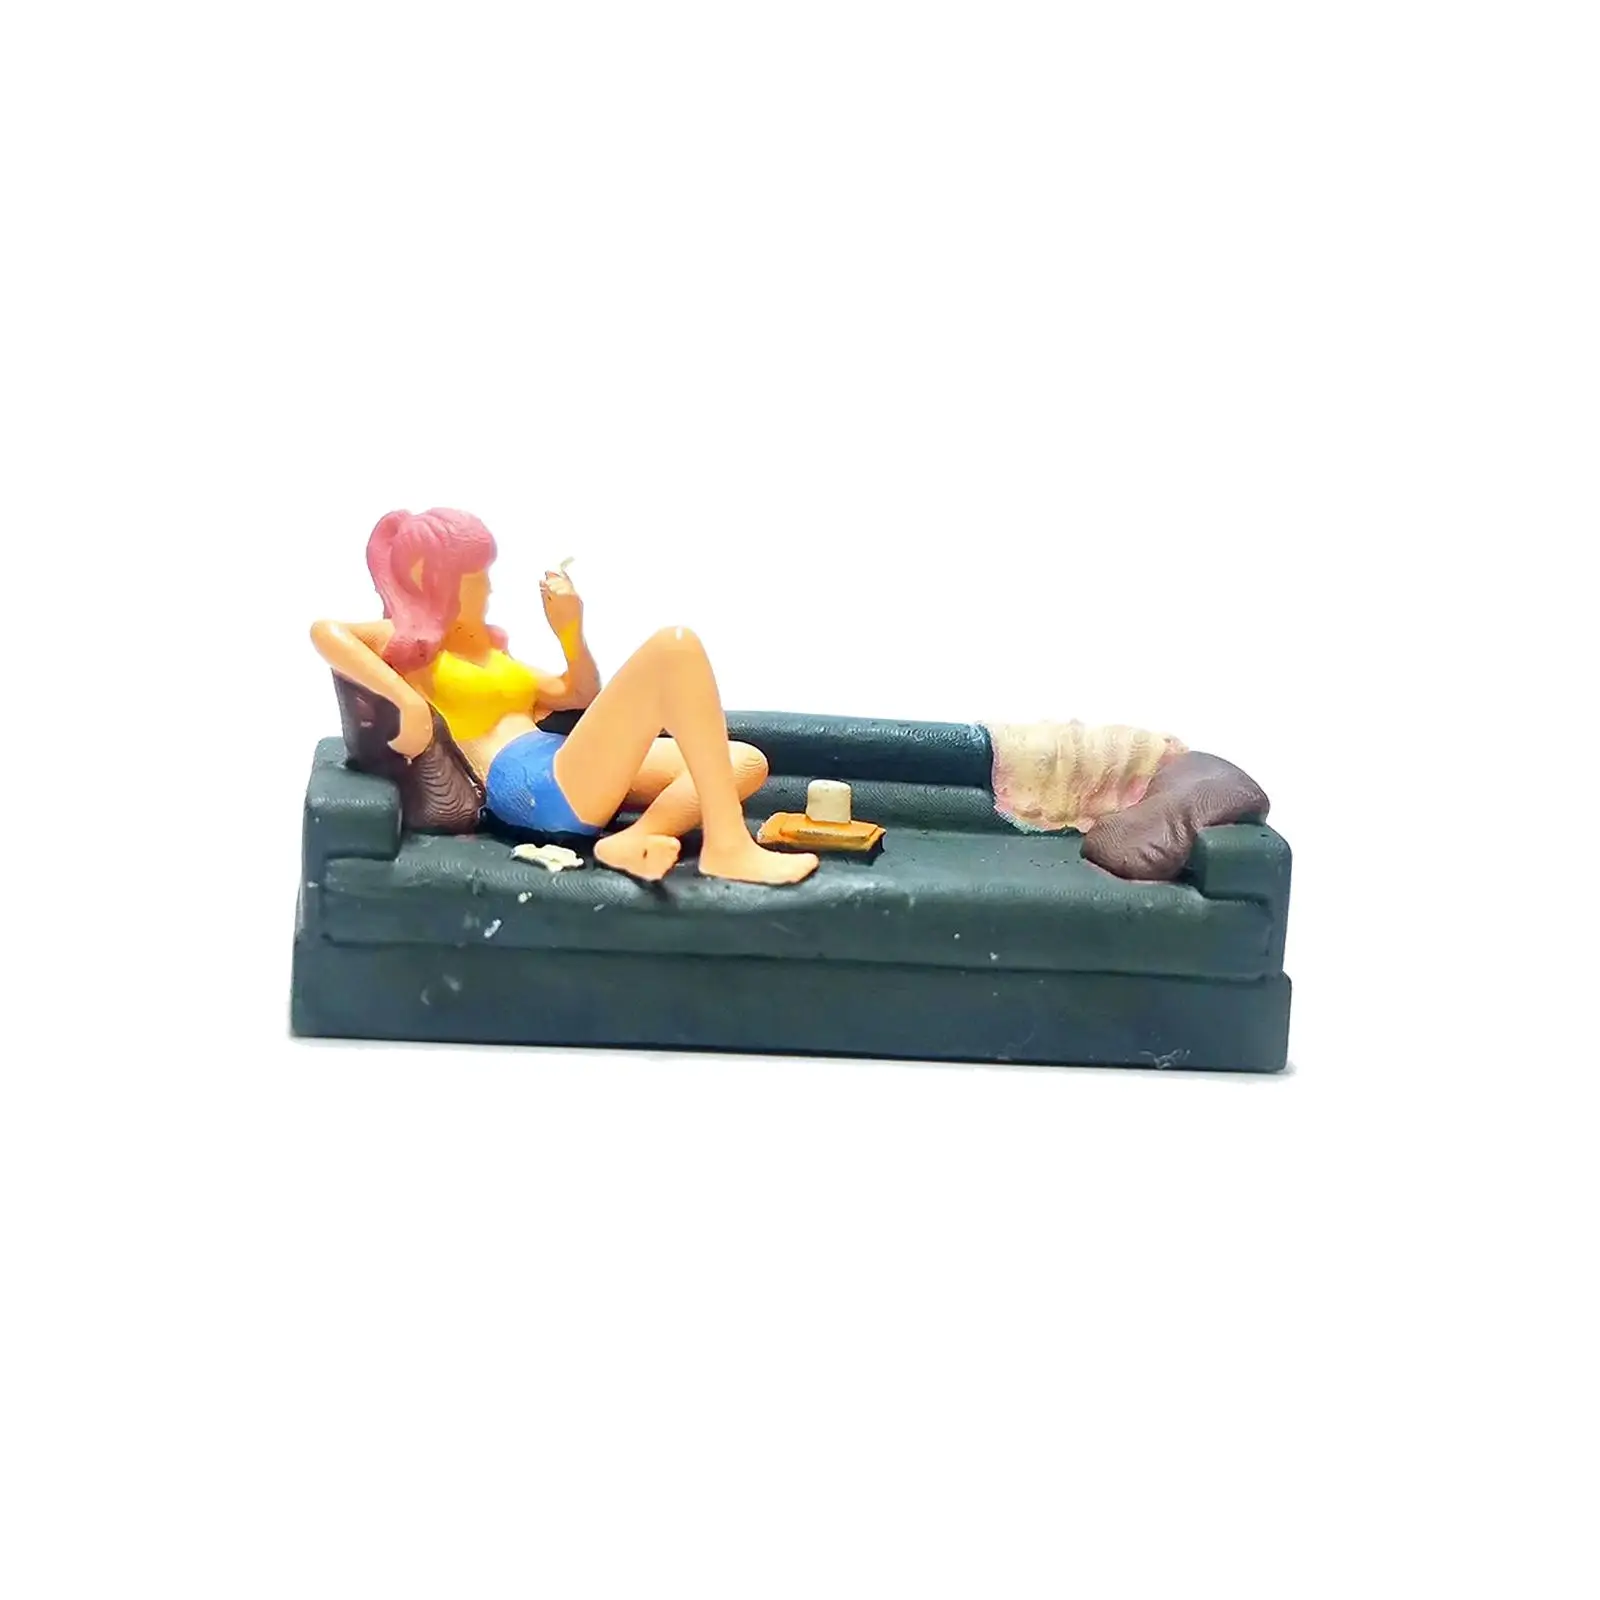 1/64 Scale Figure  on The Couch Character  for Dioramas Collections Garden